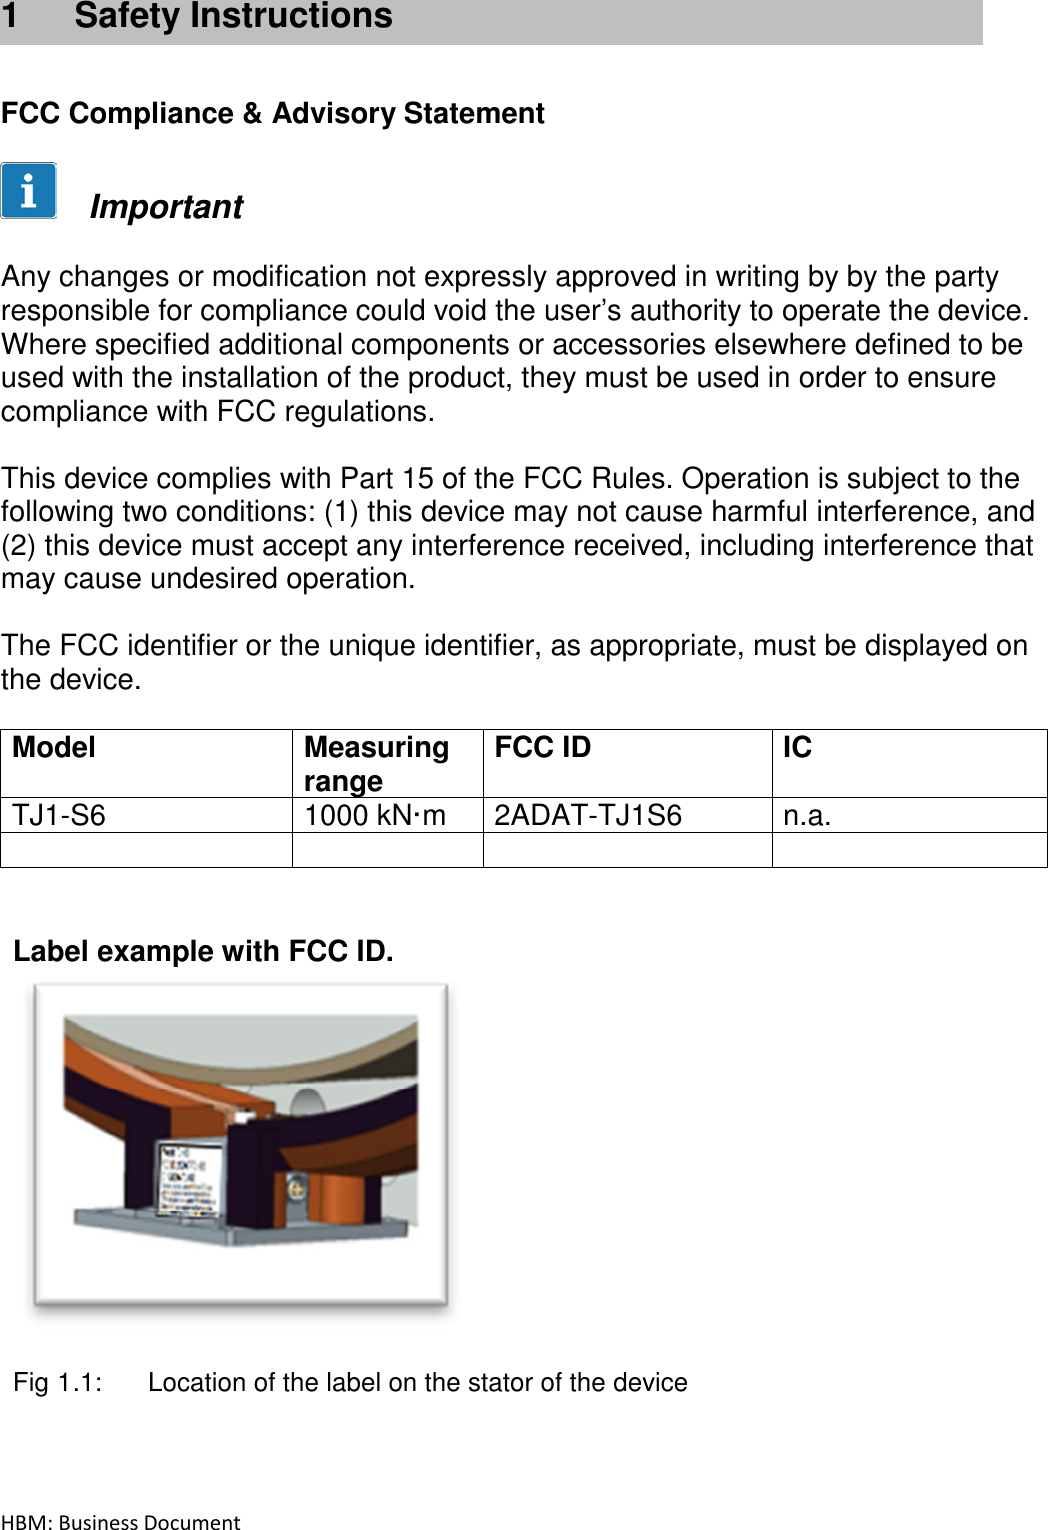 HBM: Business Document   1  Safety Instructions    FCC Compliance &amp; Advisory Statement        Important   Any changes or modification not expressly approved in writing by by the party responsible for compliance could void the user’s authority to operate the device. Where specified additional components or accessories elsewhere defined to be used with the installation of the product, they must be used in order to ensure compliance with FCC regulations.   This device complies with Part 15 of the FCC Rules. Operation is subject to the following two conditions: (1) this device may not cause harmful interference, and (2) this device must accept any interference received, including interference that may cause undesired operation.  The FCC identifier or the unique identifier, as appropriate, must be displayed on the device.  Model  Measuring range FCC ID  IC TJ1-S6  1000 kN·m  2ADAT-TJ1S6  n.a.          Label example with FCC ID.   Fig 1.1:  Location of the label on the stator of the device    